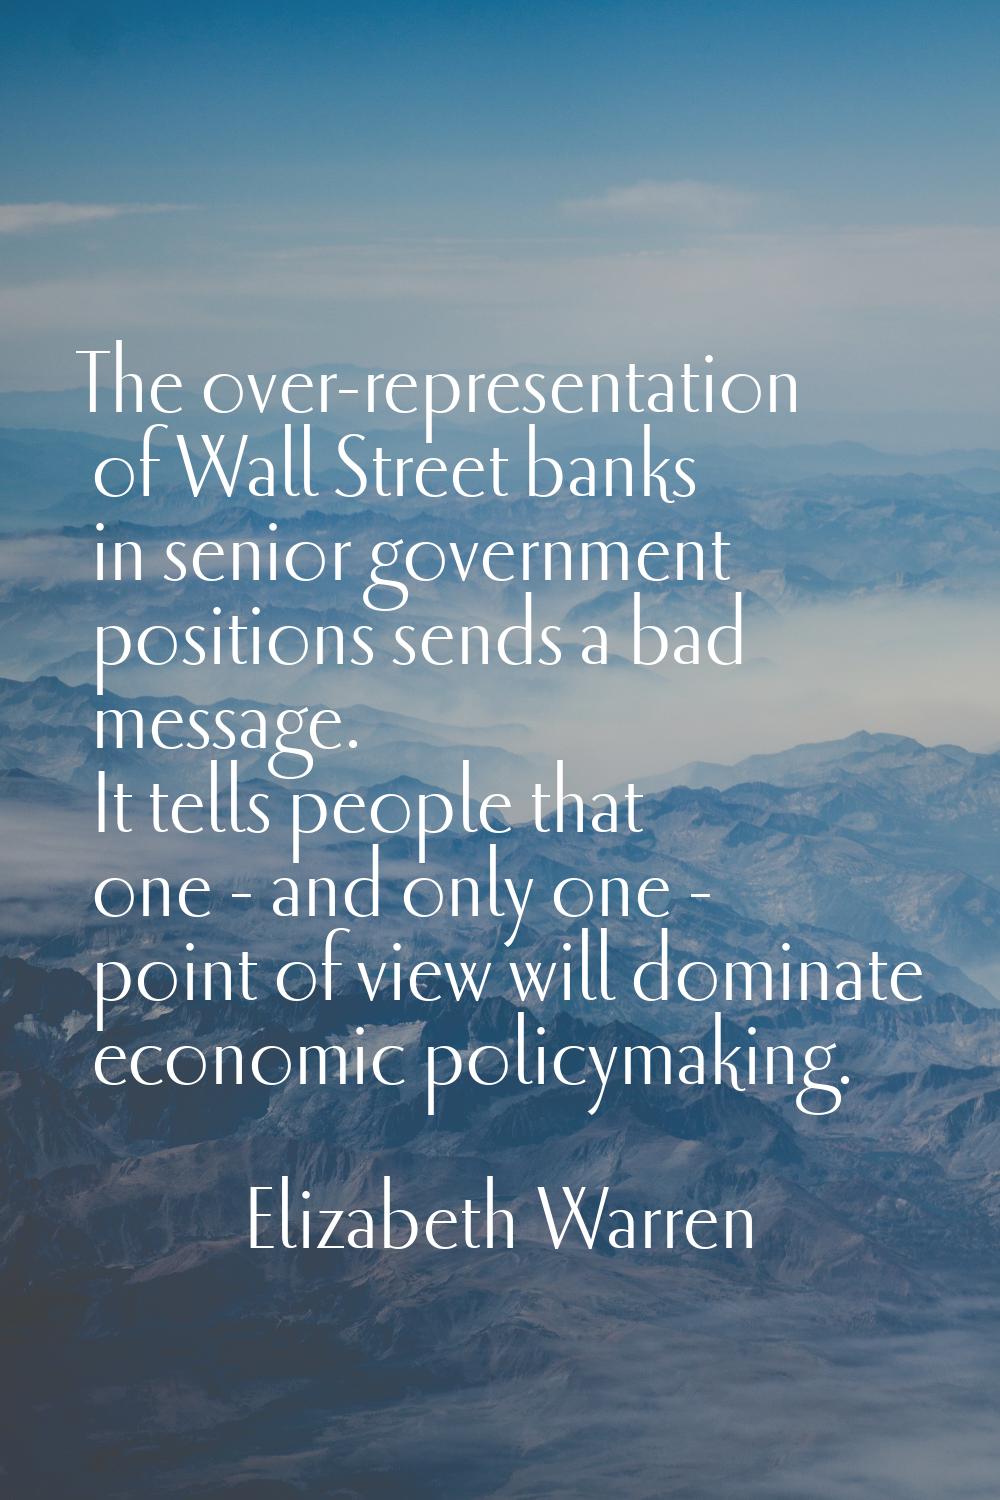 The over-representation of Wall Street banks in senior government positions sends a bad message. It